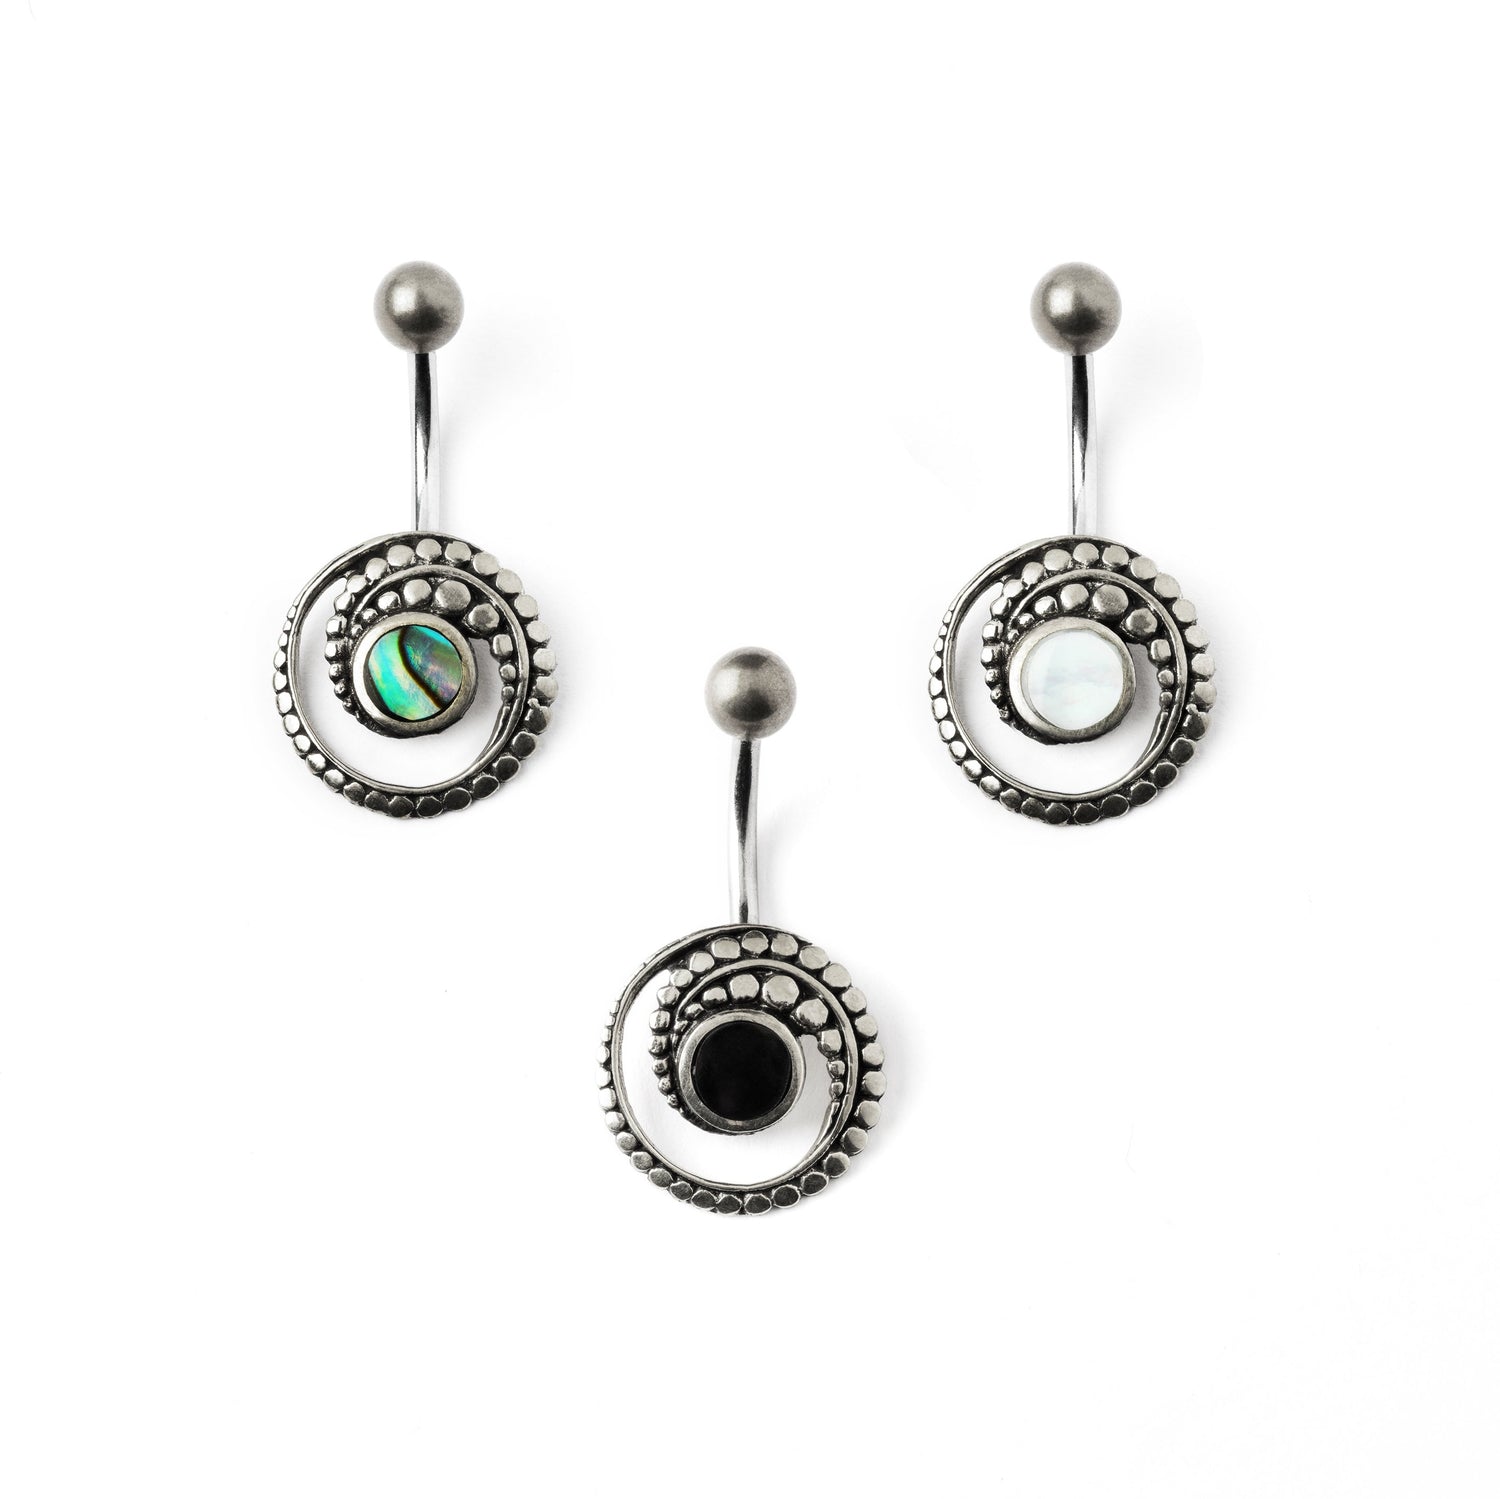 Silver spiral belly piercing with mother of pearl, abalone and black onyx